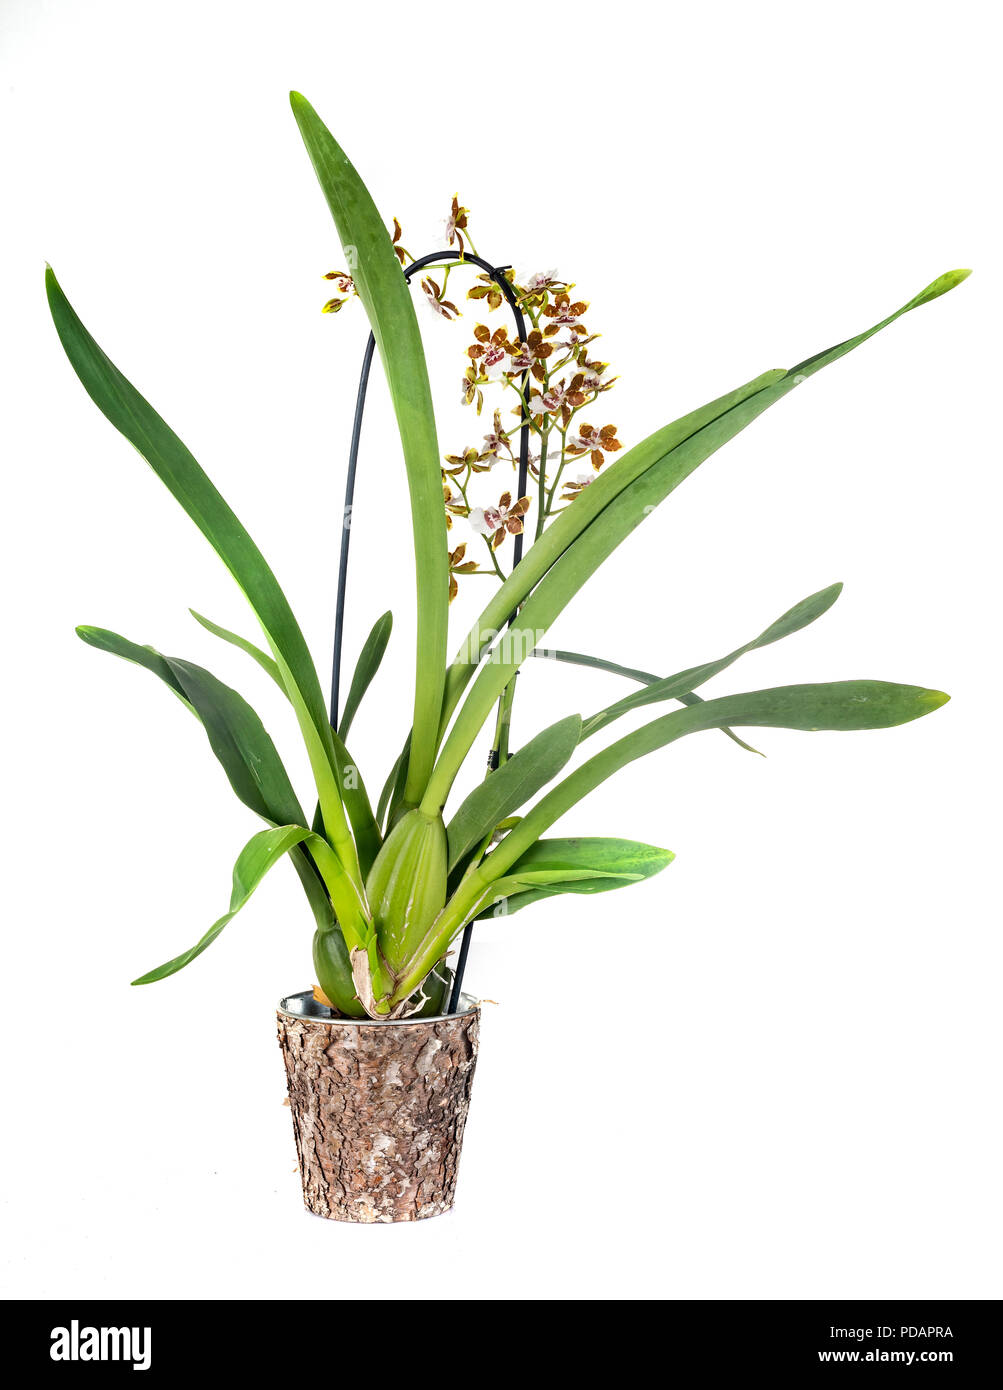 Oncidium orchids in front of white background Stock Photo